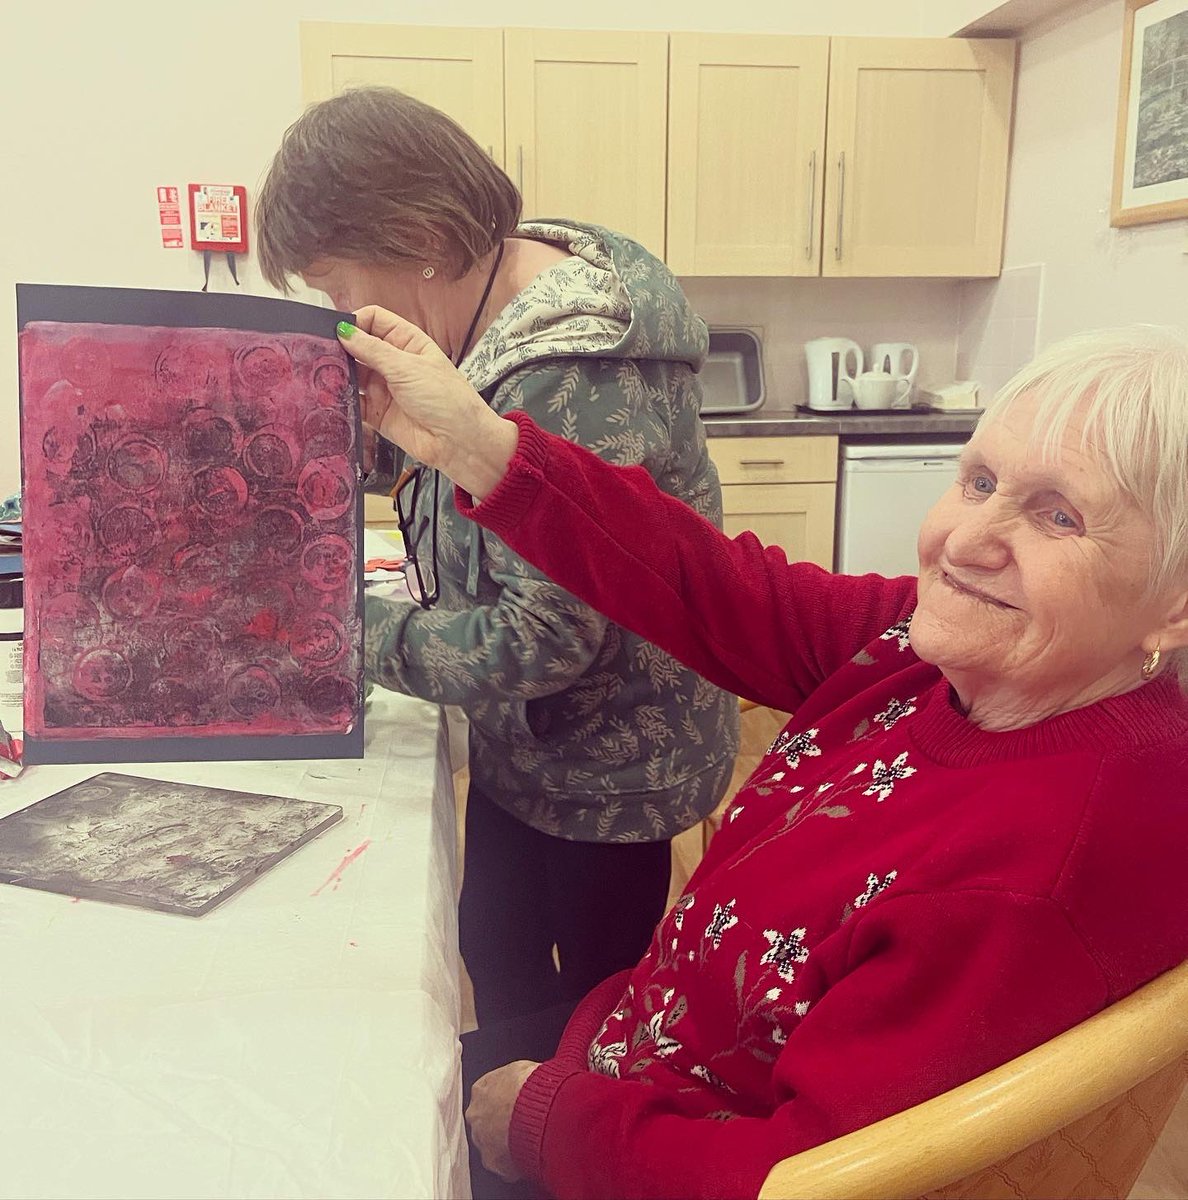 Our ‘River of Time’ Legacy Project…..a creative family history project led by @Artwithsarah1 A beautiful project to document and share personal histories and pass them on to the younger generation #sharingstories #legacy #wellbeing #creativity #community #FamilyHistory